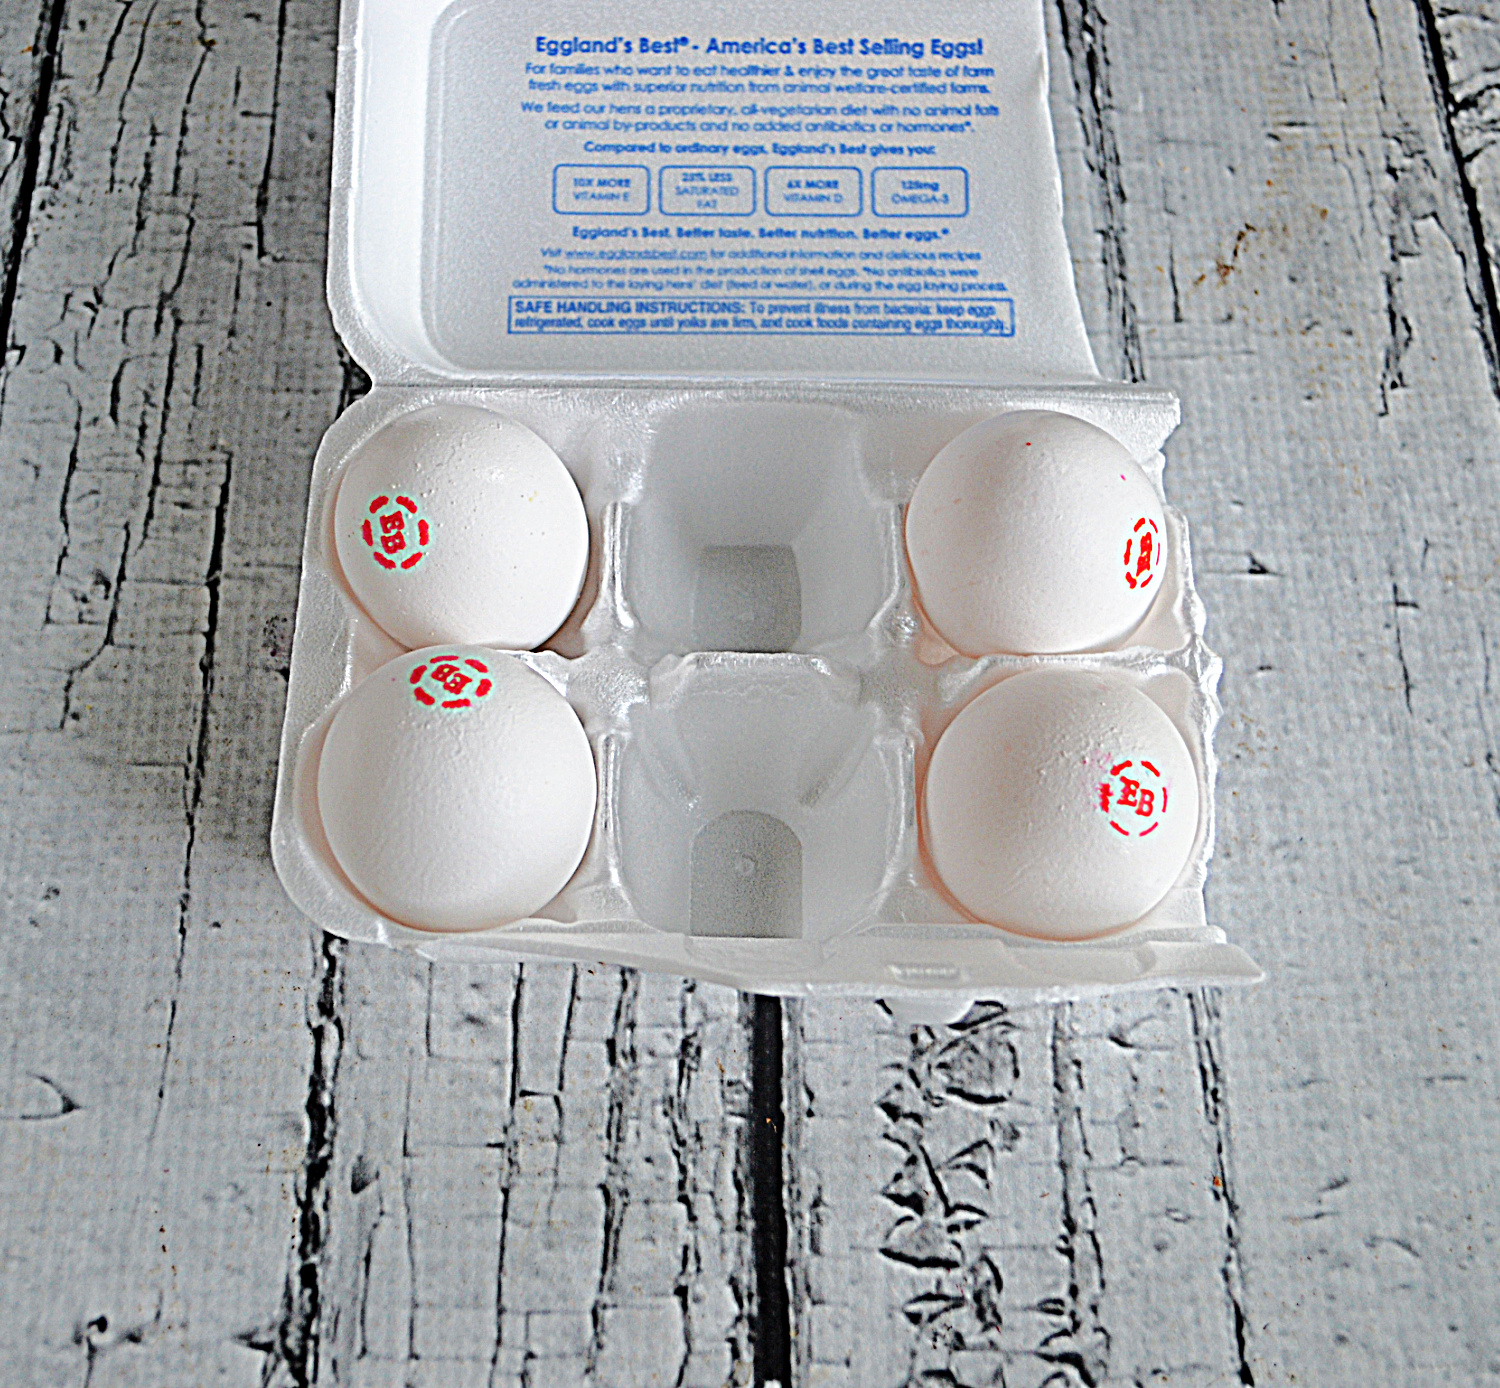 A container with 4 eggs in it. 